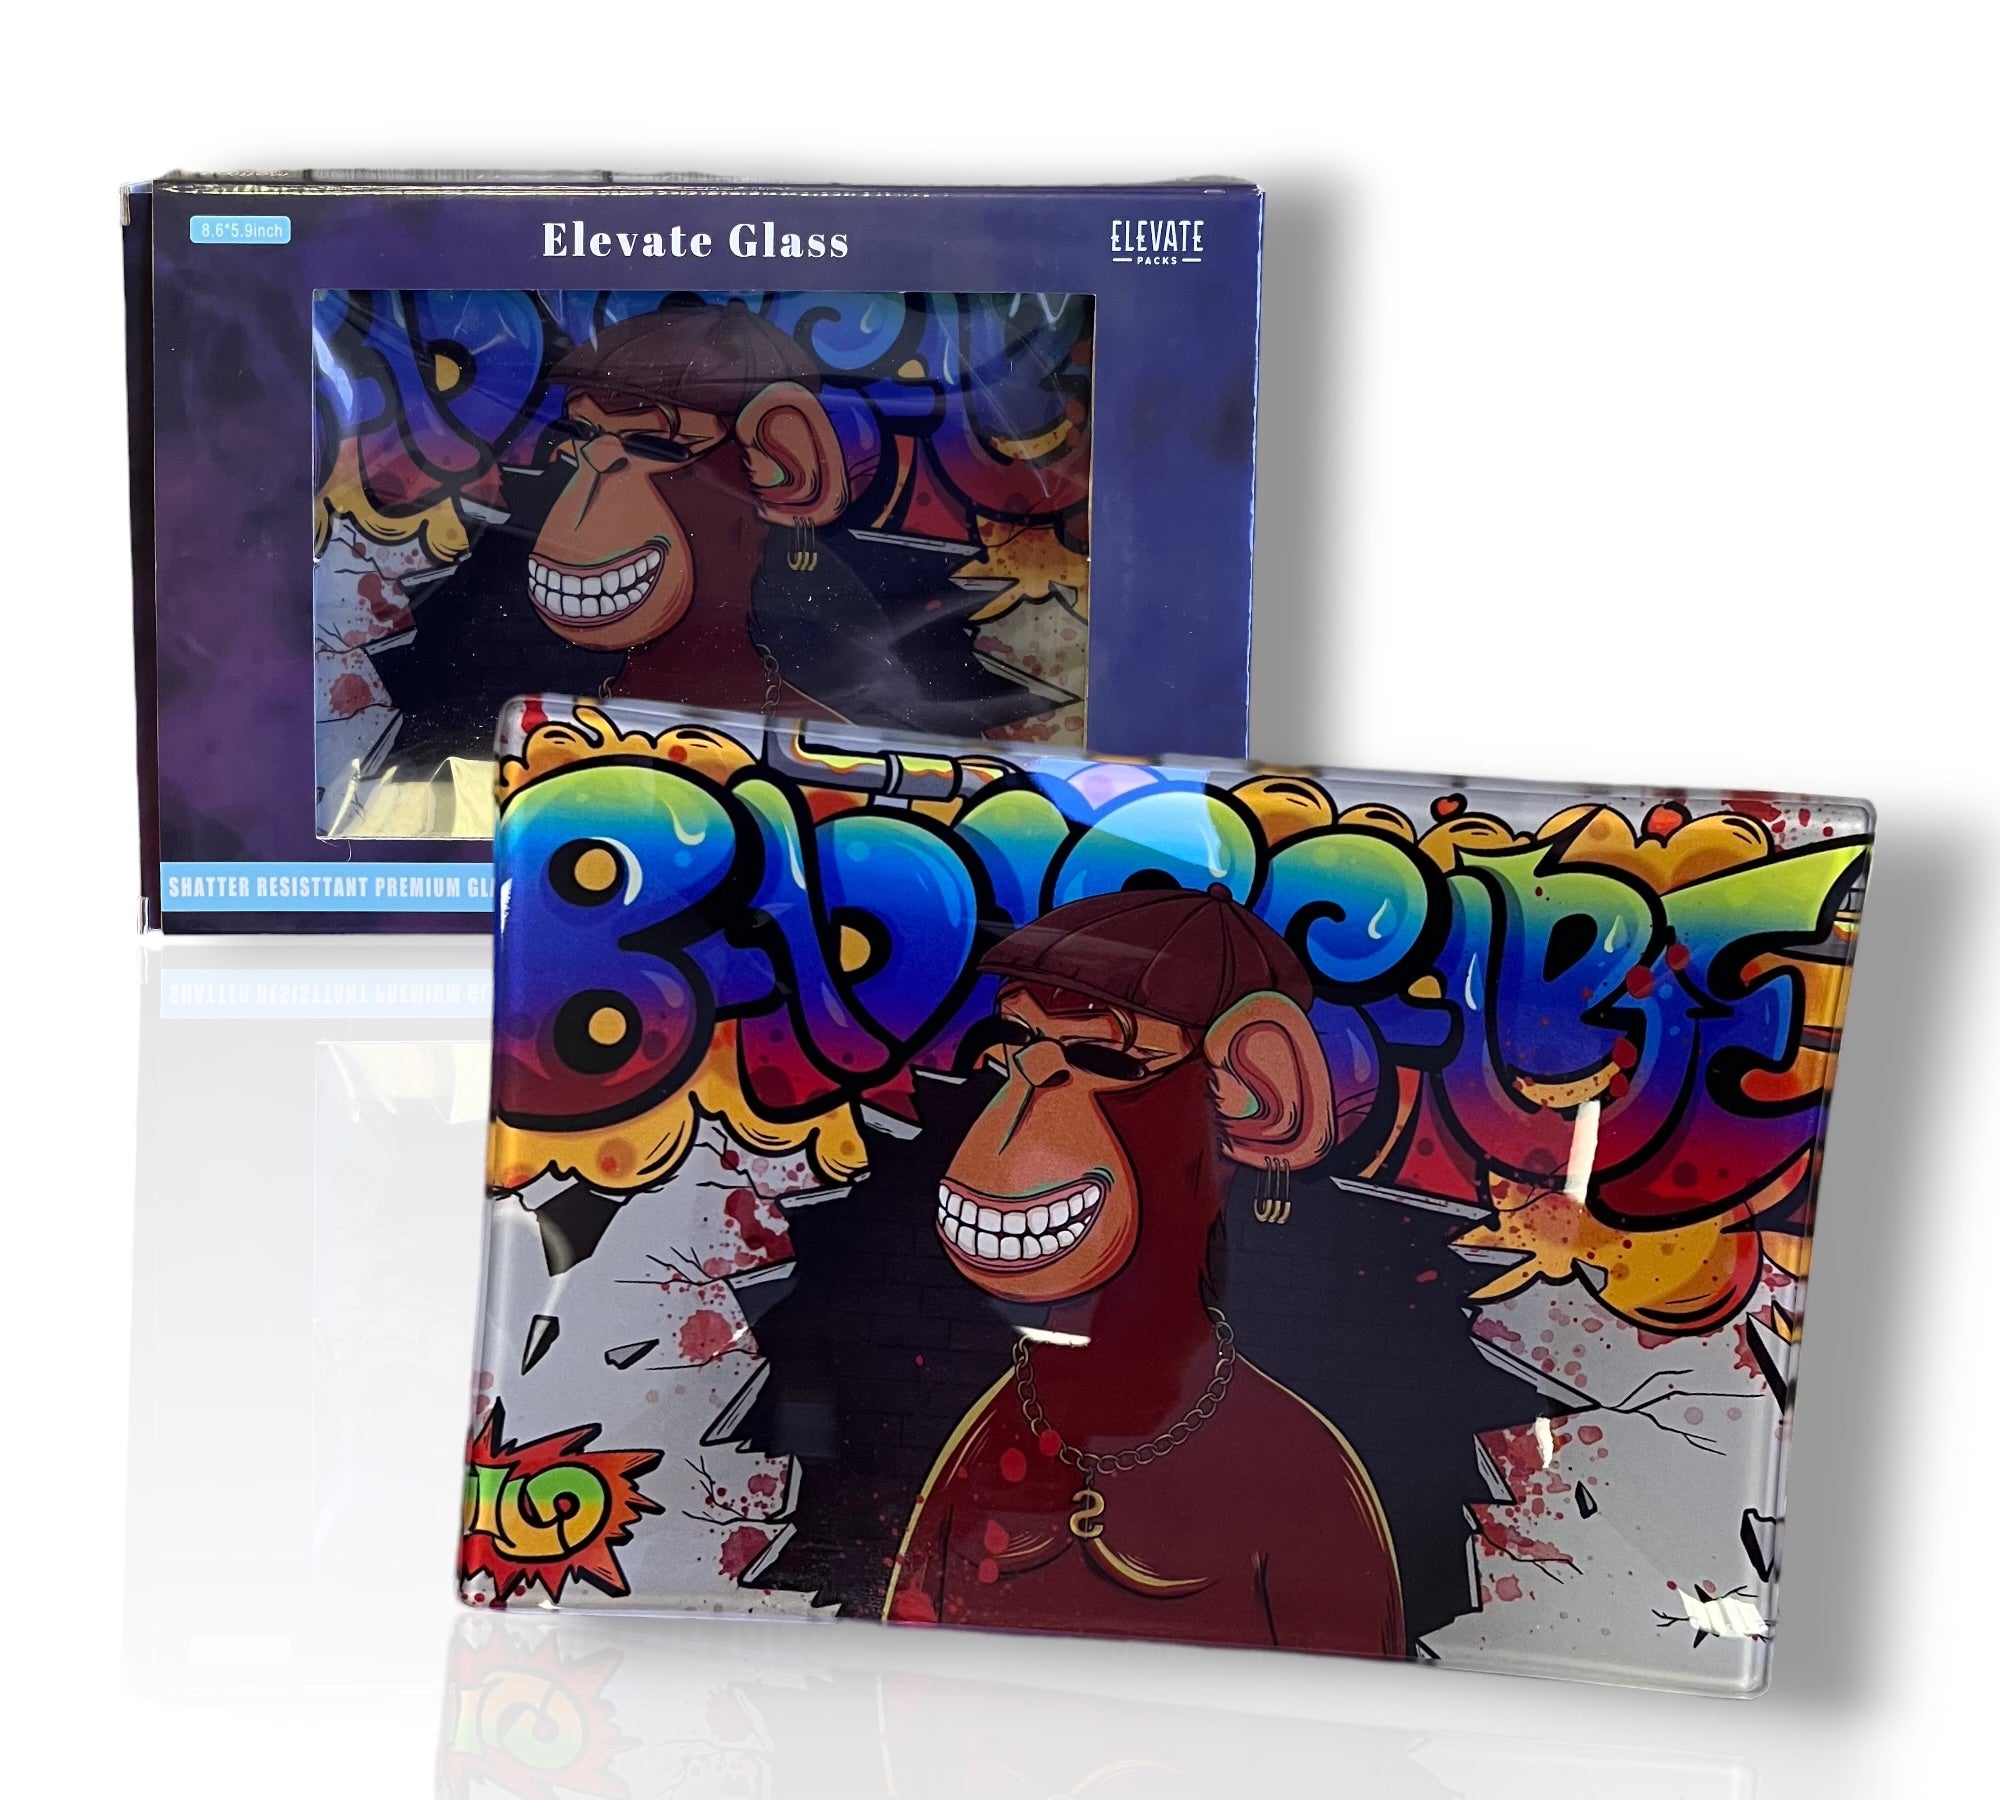 Bad Monkey Elevate Glass Shatter Resistant Rolling Tray